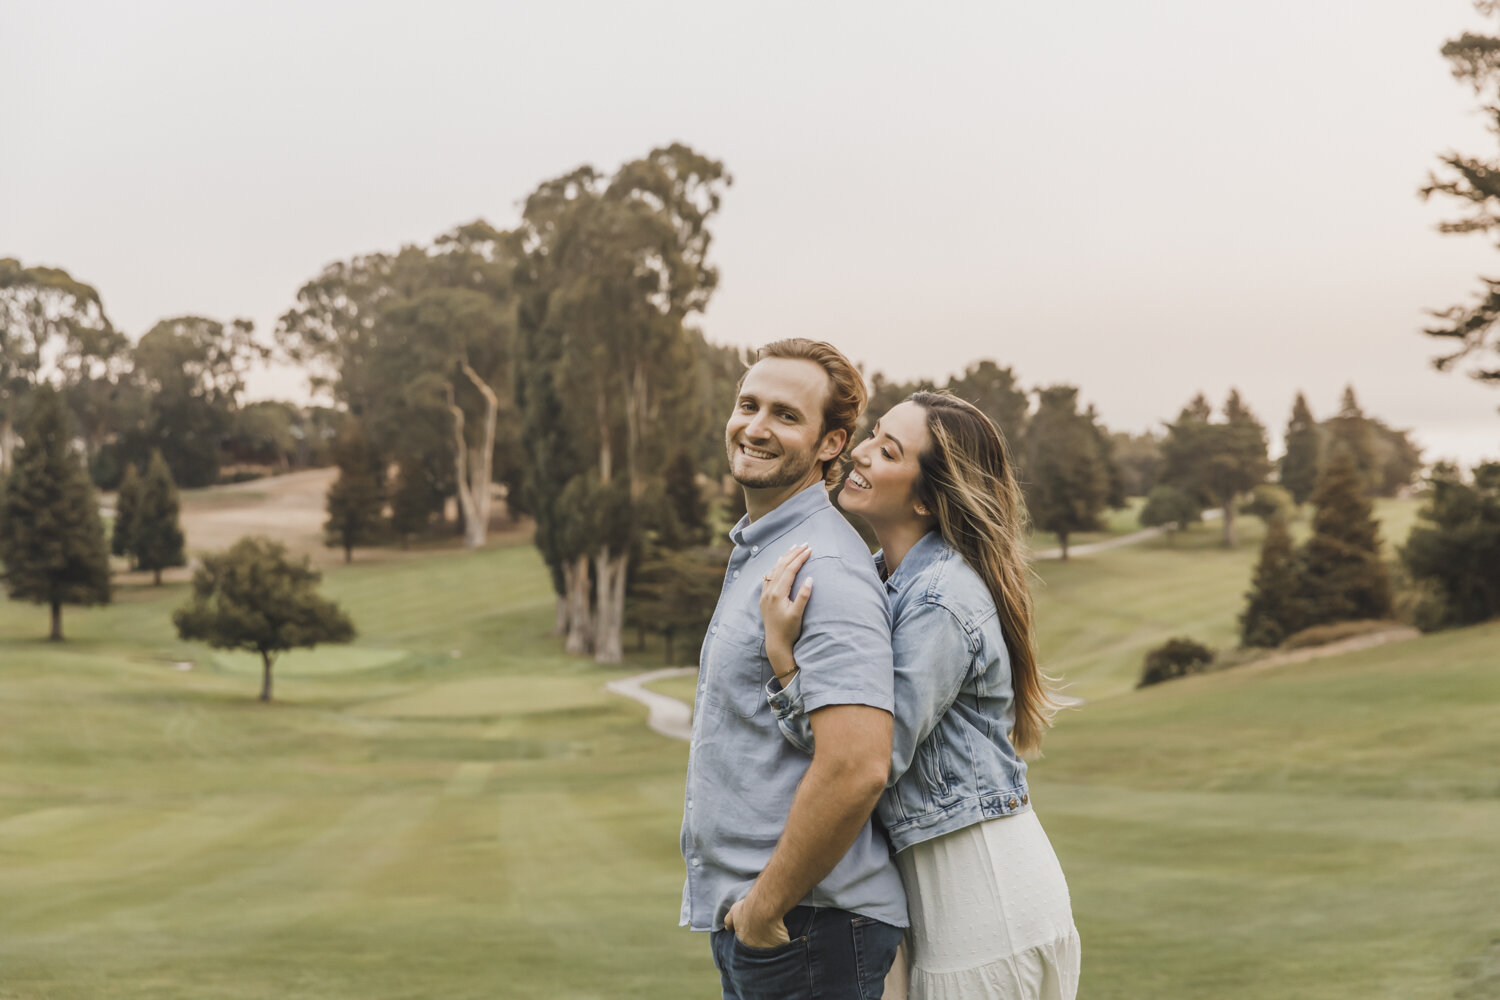 PERRUCCIPHOTO_GOLF_COURSE_ENGAGEMENT_50.jpg